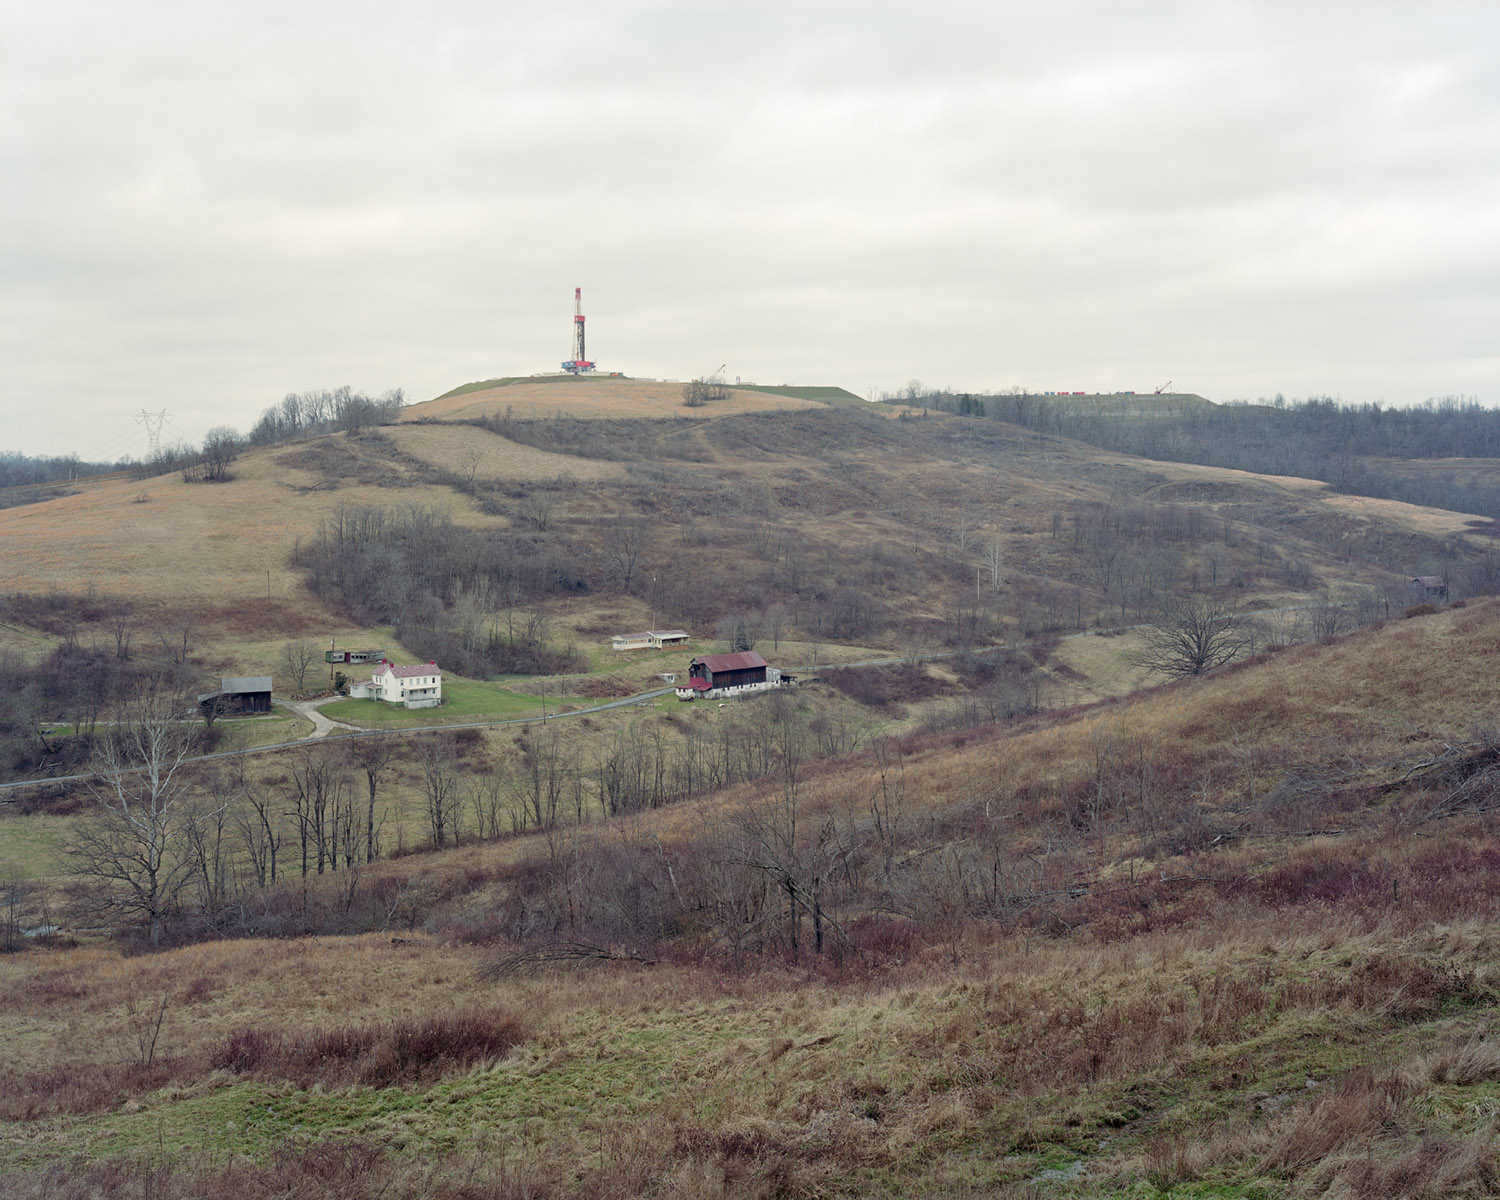  View of a natural-gas drilling rig along Devil’s Half Acre Road in East Finley, PA on 01/24/2012.&nbsp; © Noah Addis/MSDP 2012 